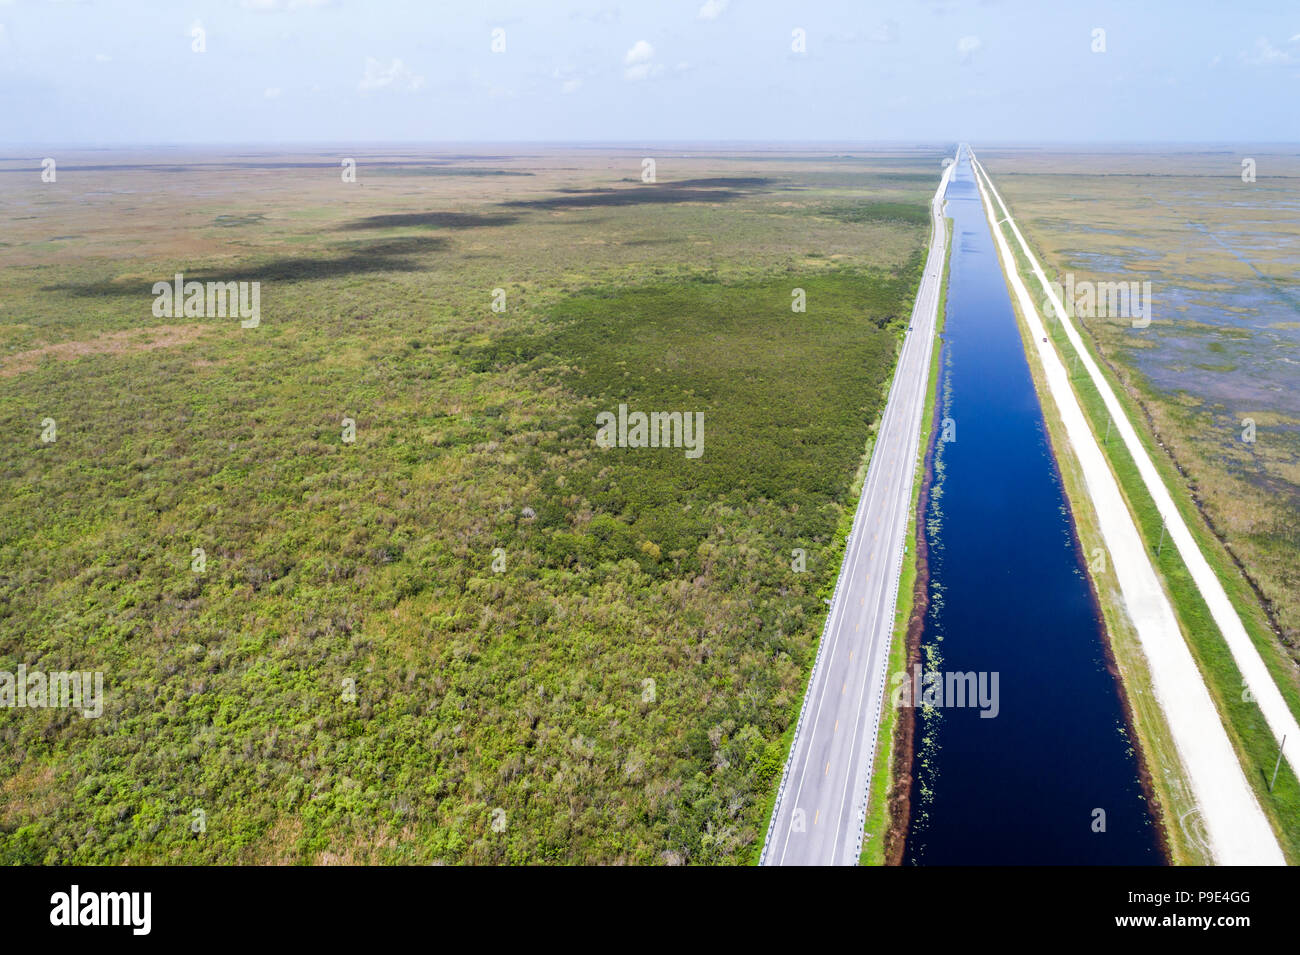 Miami Florida,Everglades National Park,Tamiami Trail US route 41 highway,canal,levee,water conservation area 3A,freshwater slough,aerial overhead view Stock Photo